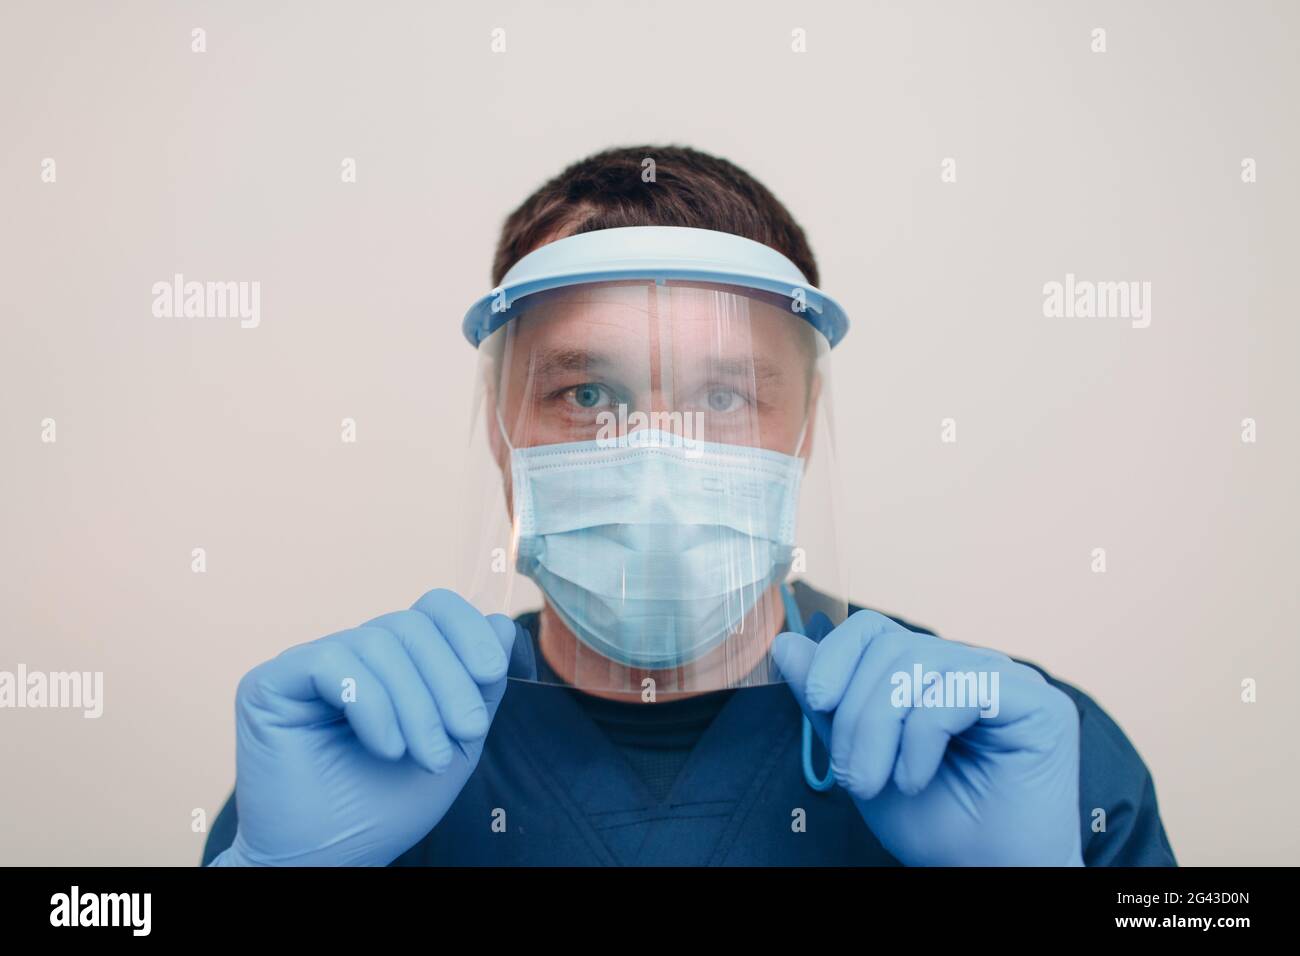 Man in face medical surgical mask with transparent shield mask and gloves Stock Photo